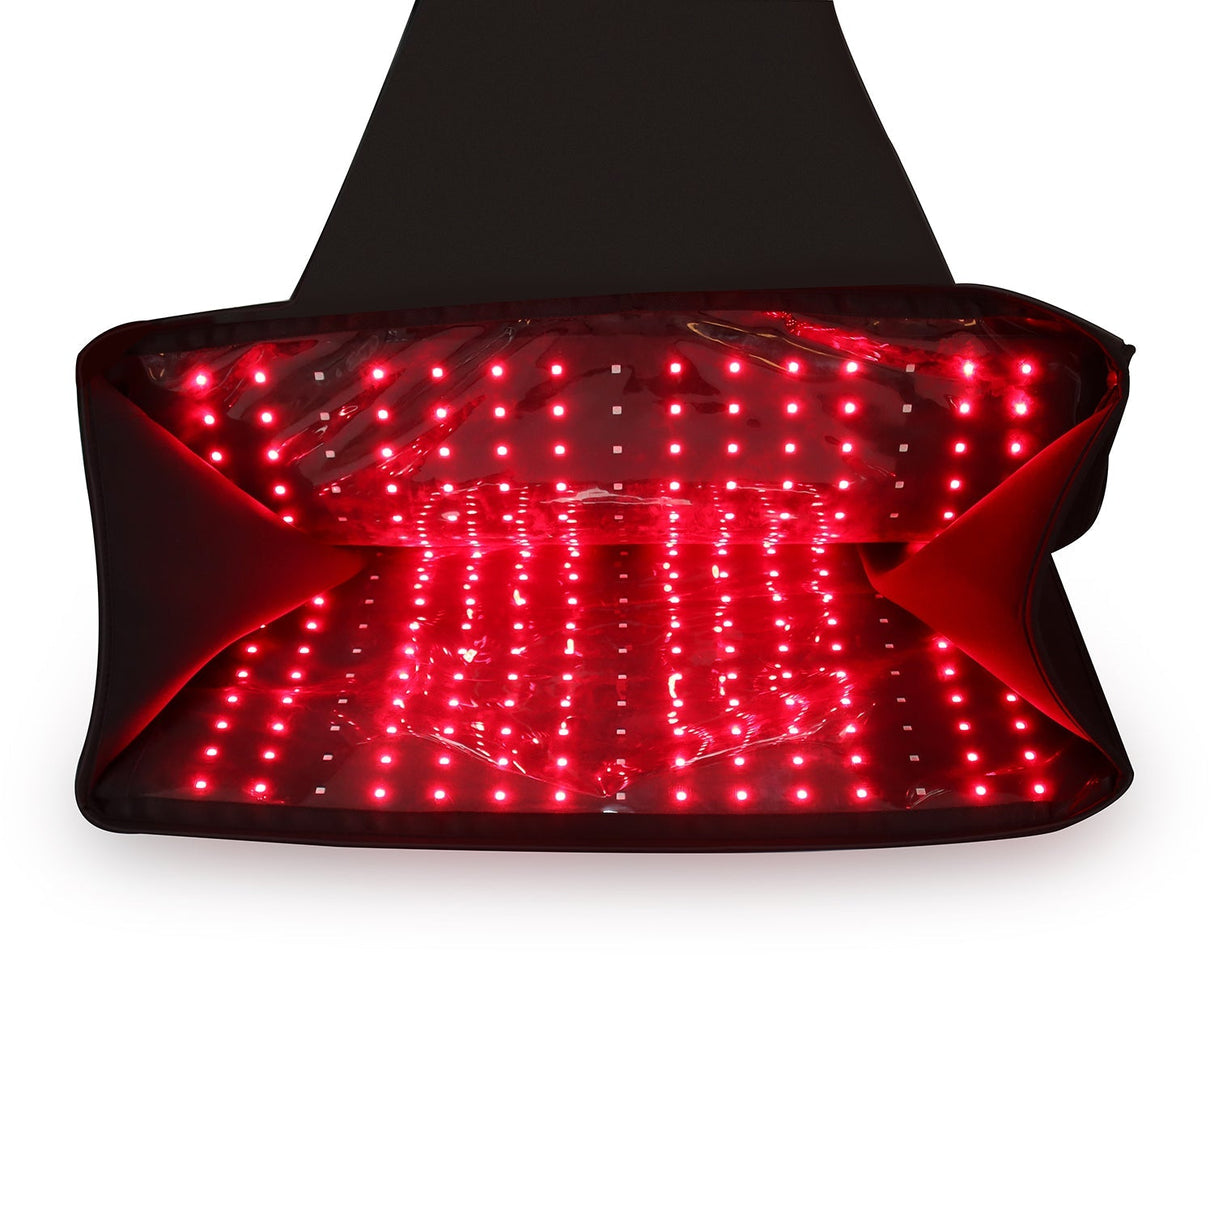 Hooga | Red Light Therapy Pod